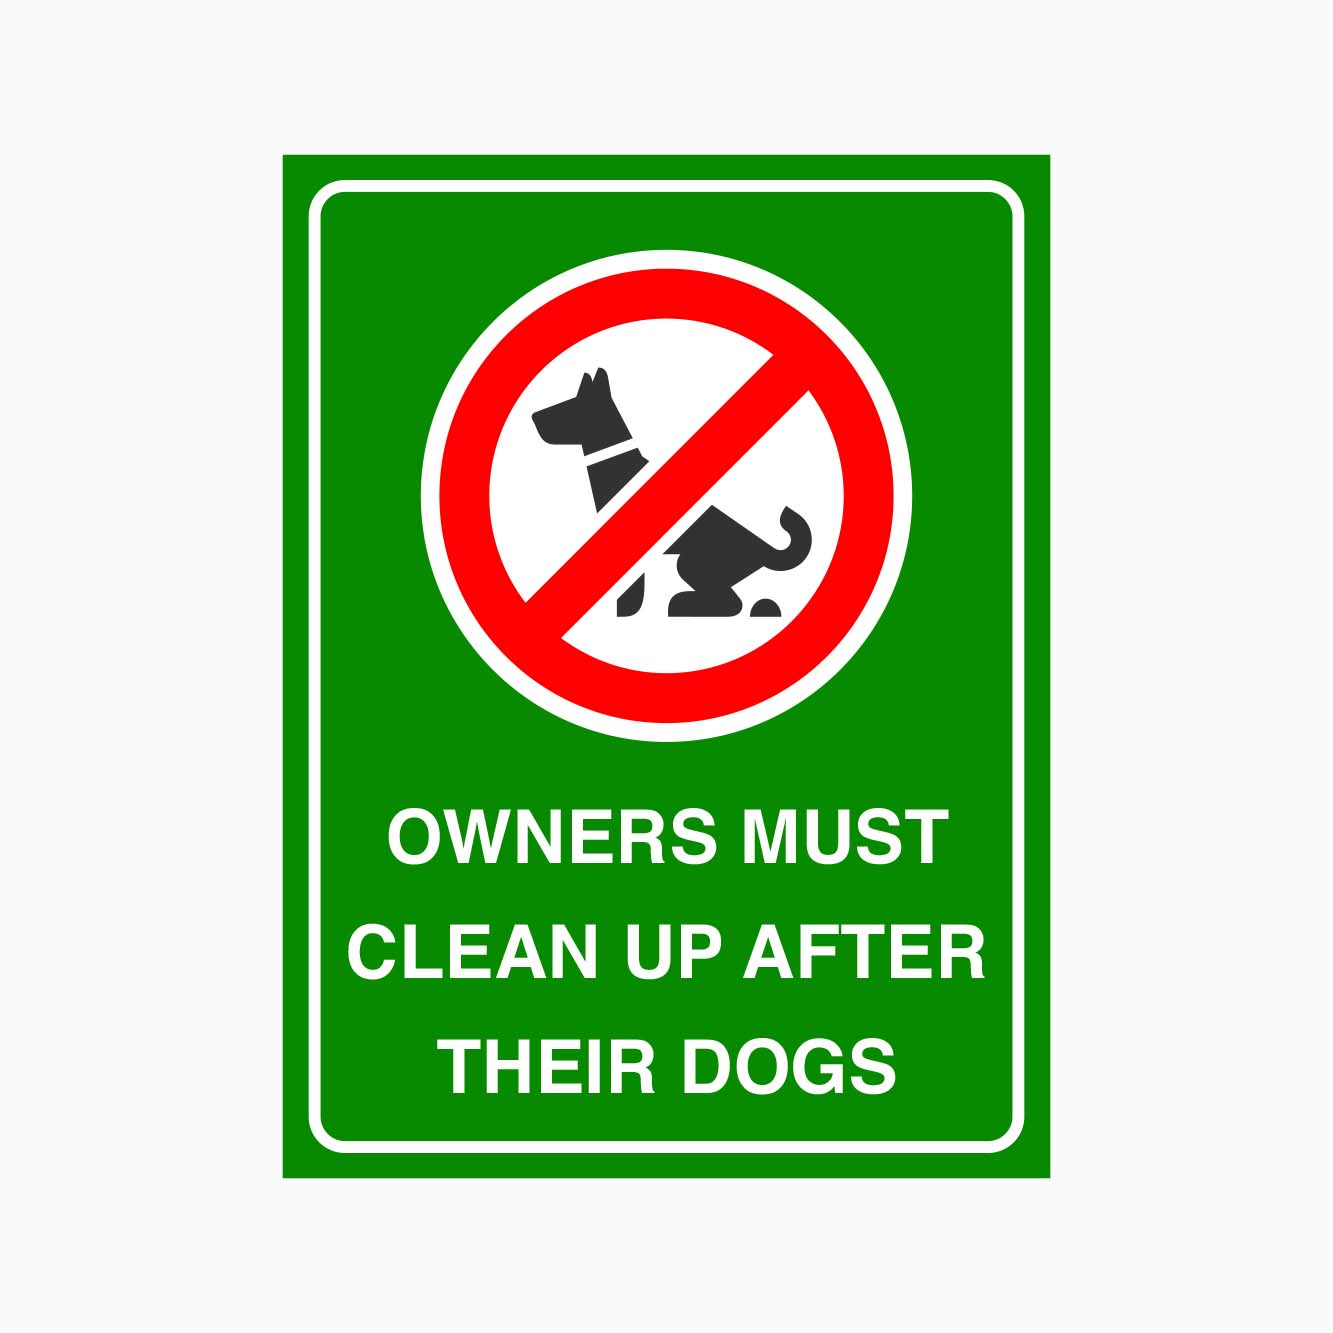 OWNERS MUST CLEAN UP AFTER THEIR DOGS SIGN - GET SIGNS 